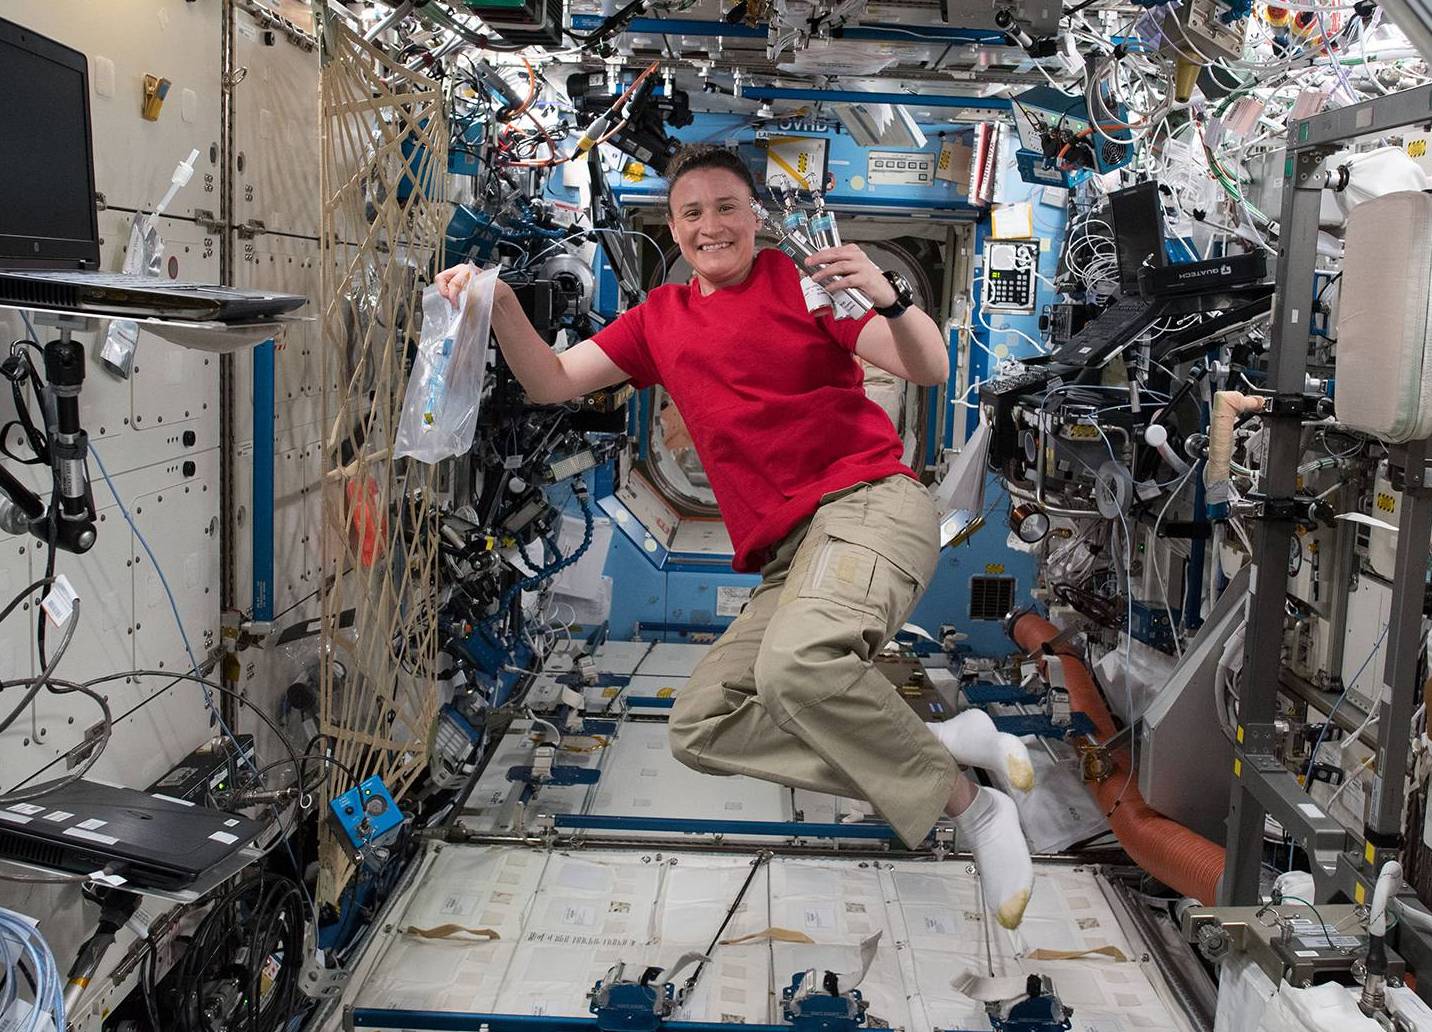 Dr. Auñón-Chancellor on board the Space Station